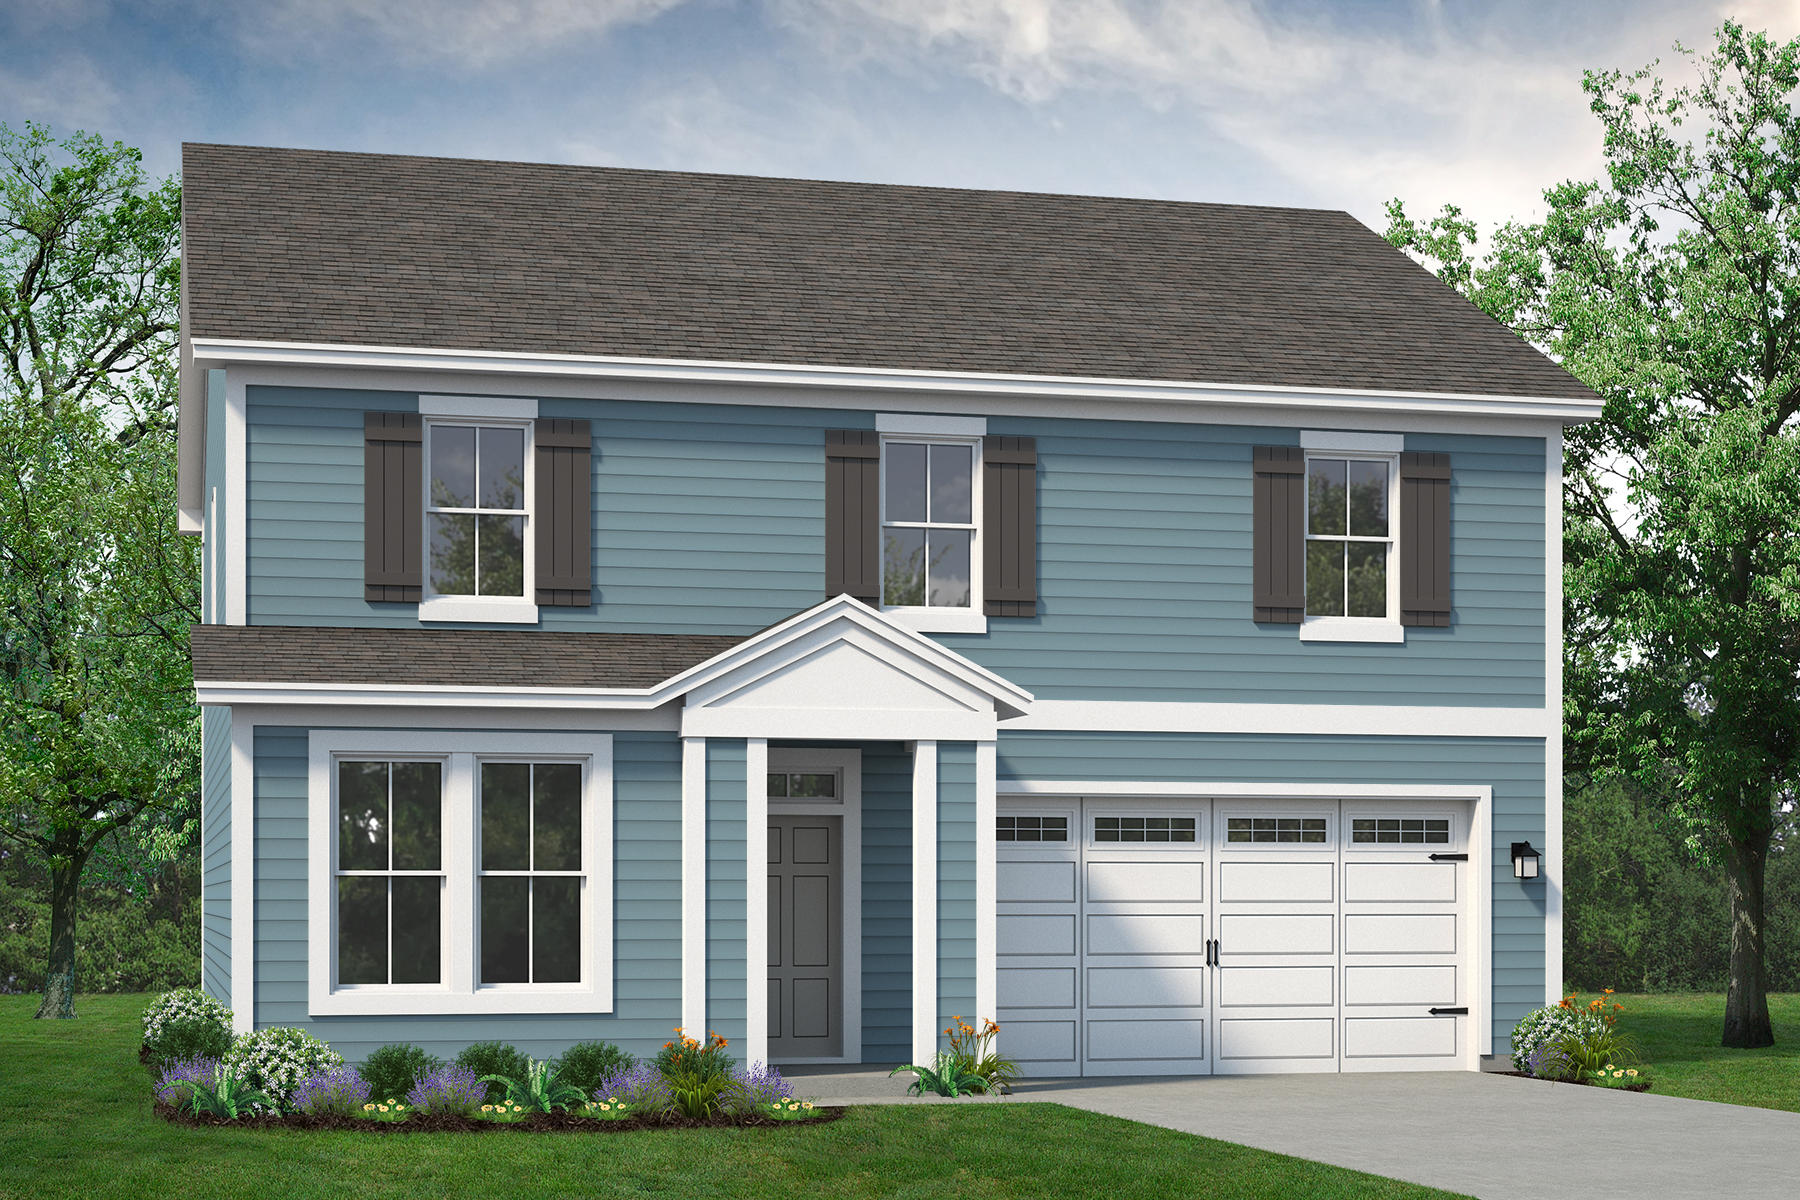 Elevation B. 2,427sf New Home in Angier, NC